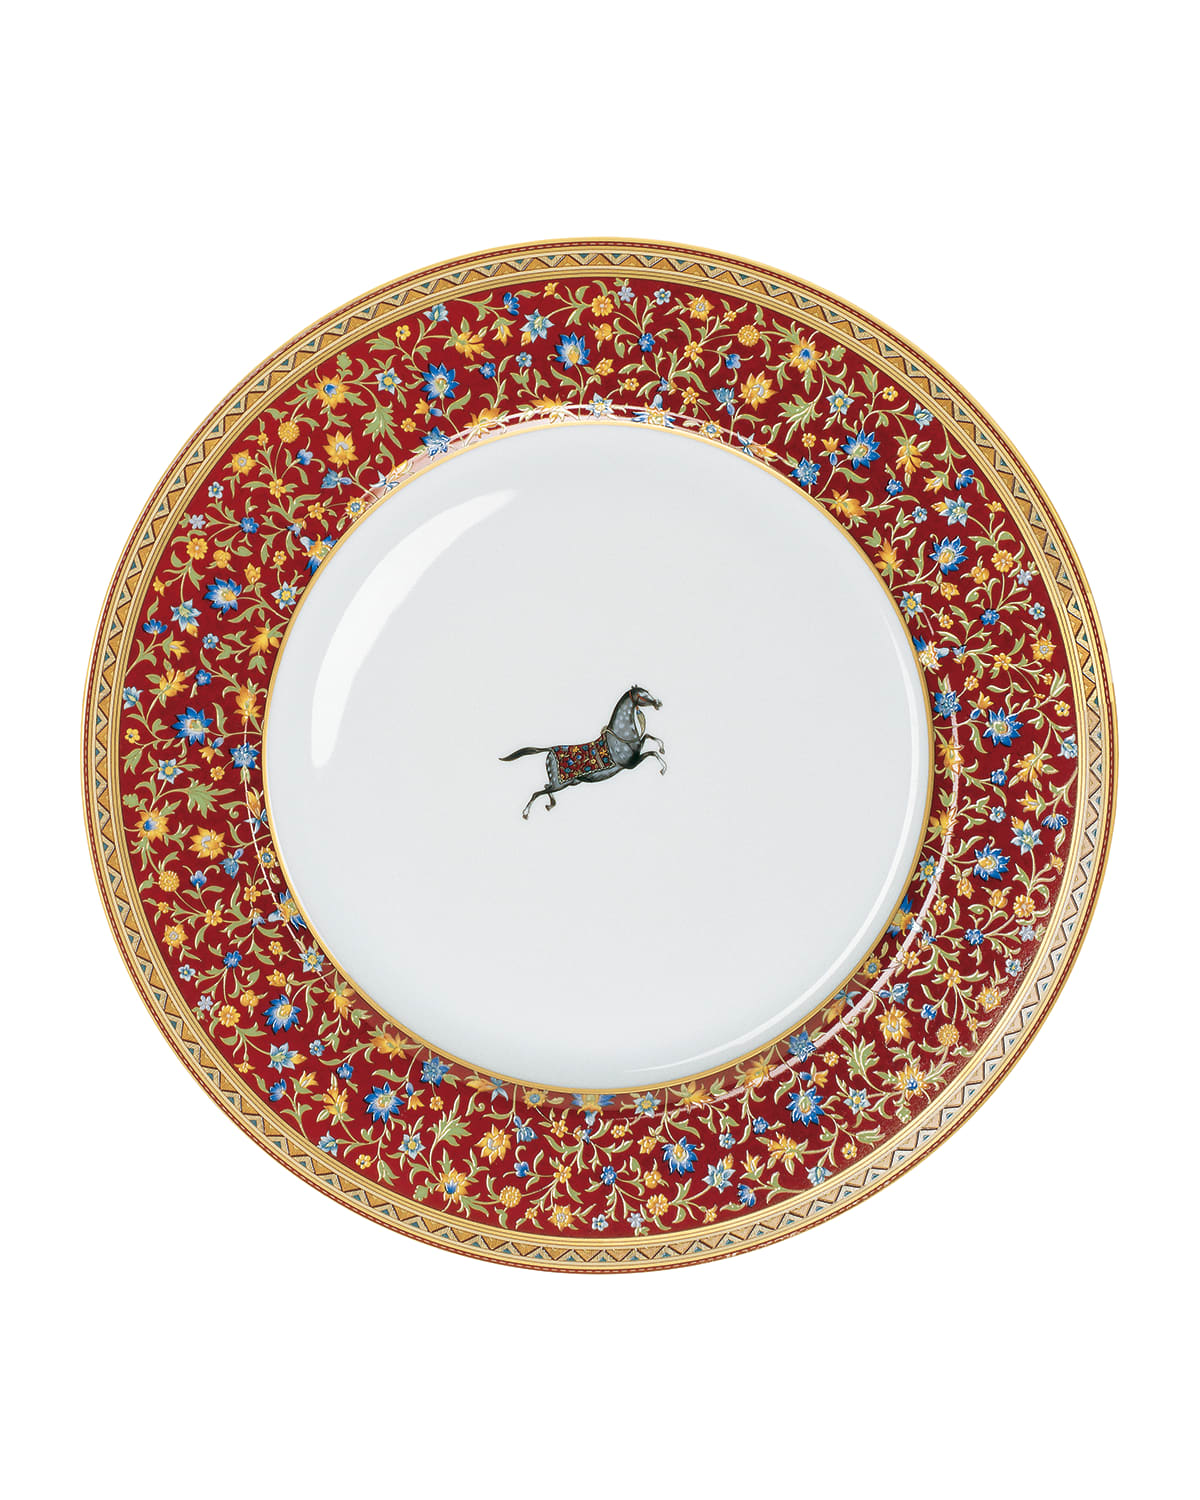 Cheval D'Orient American Dinner Plate